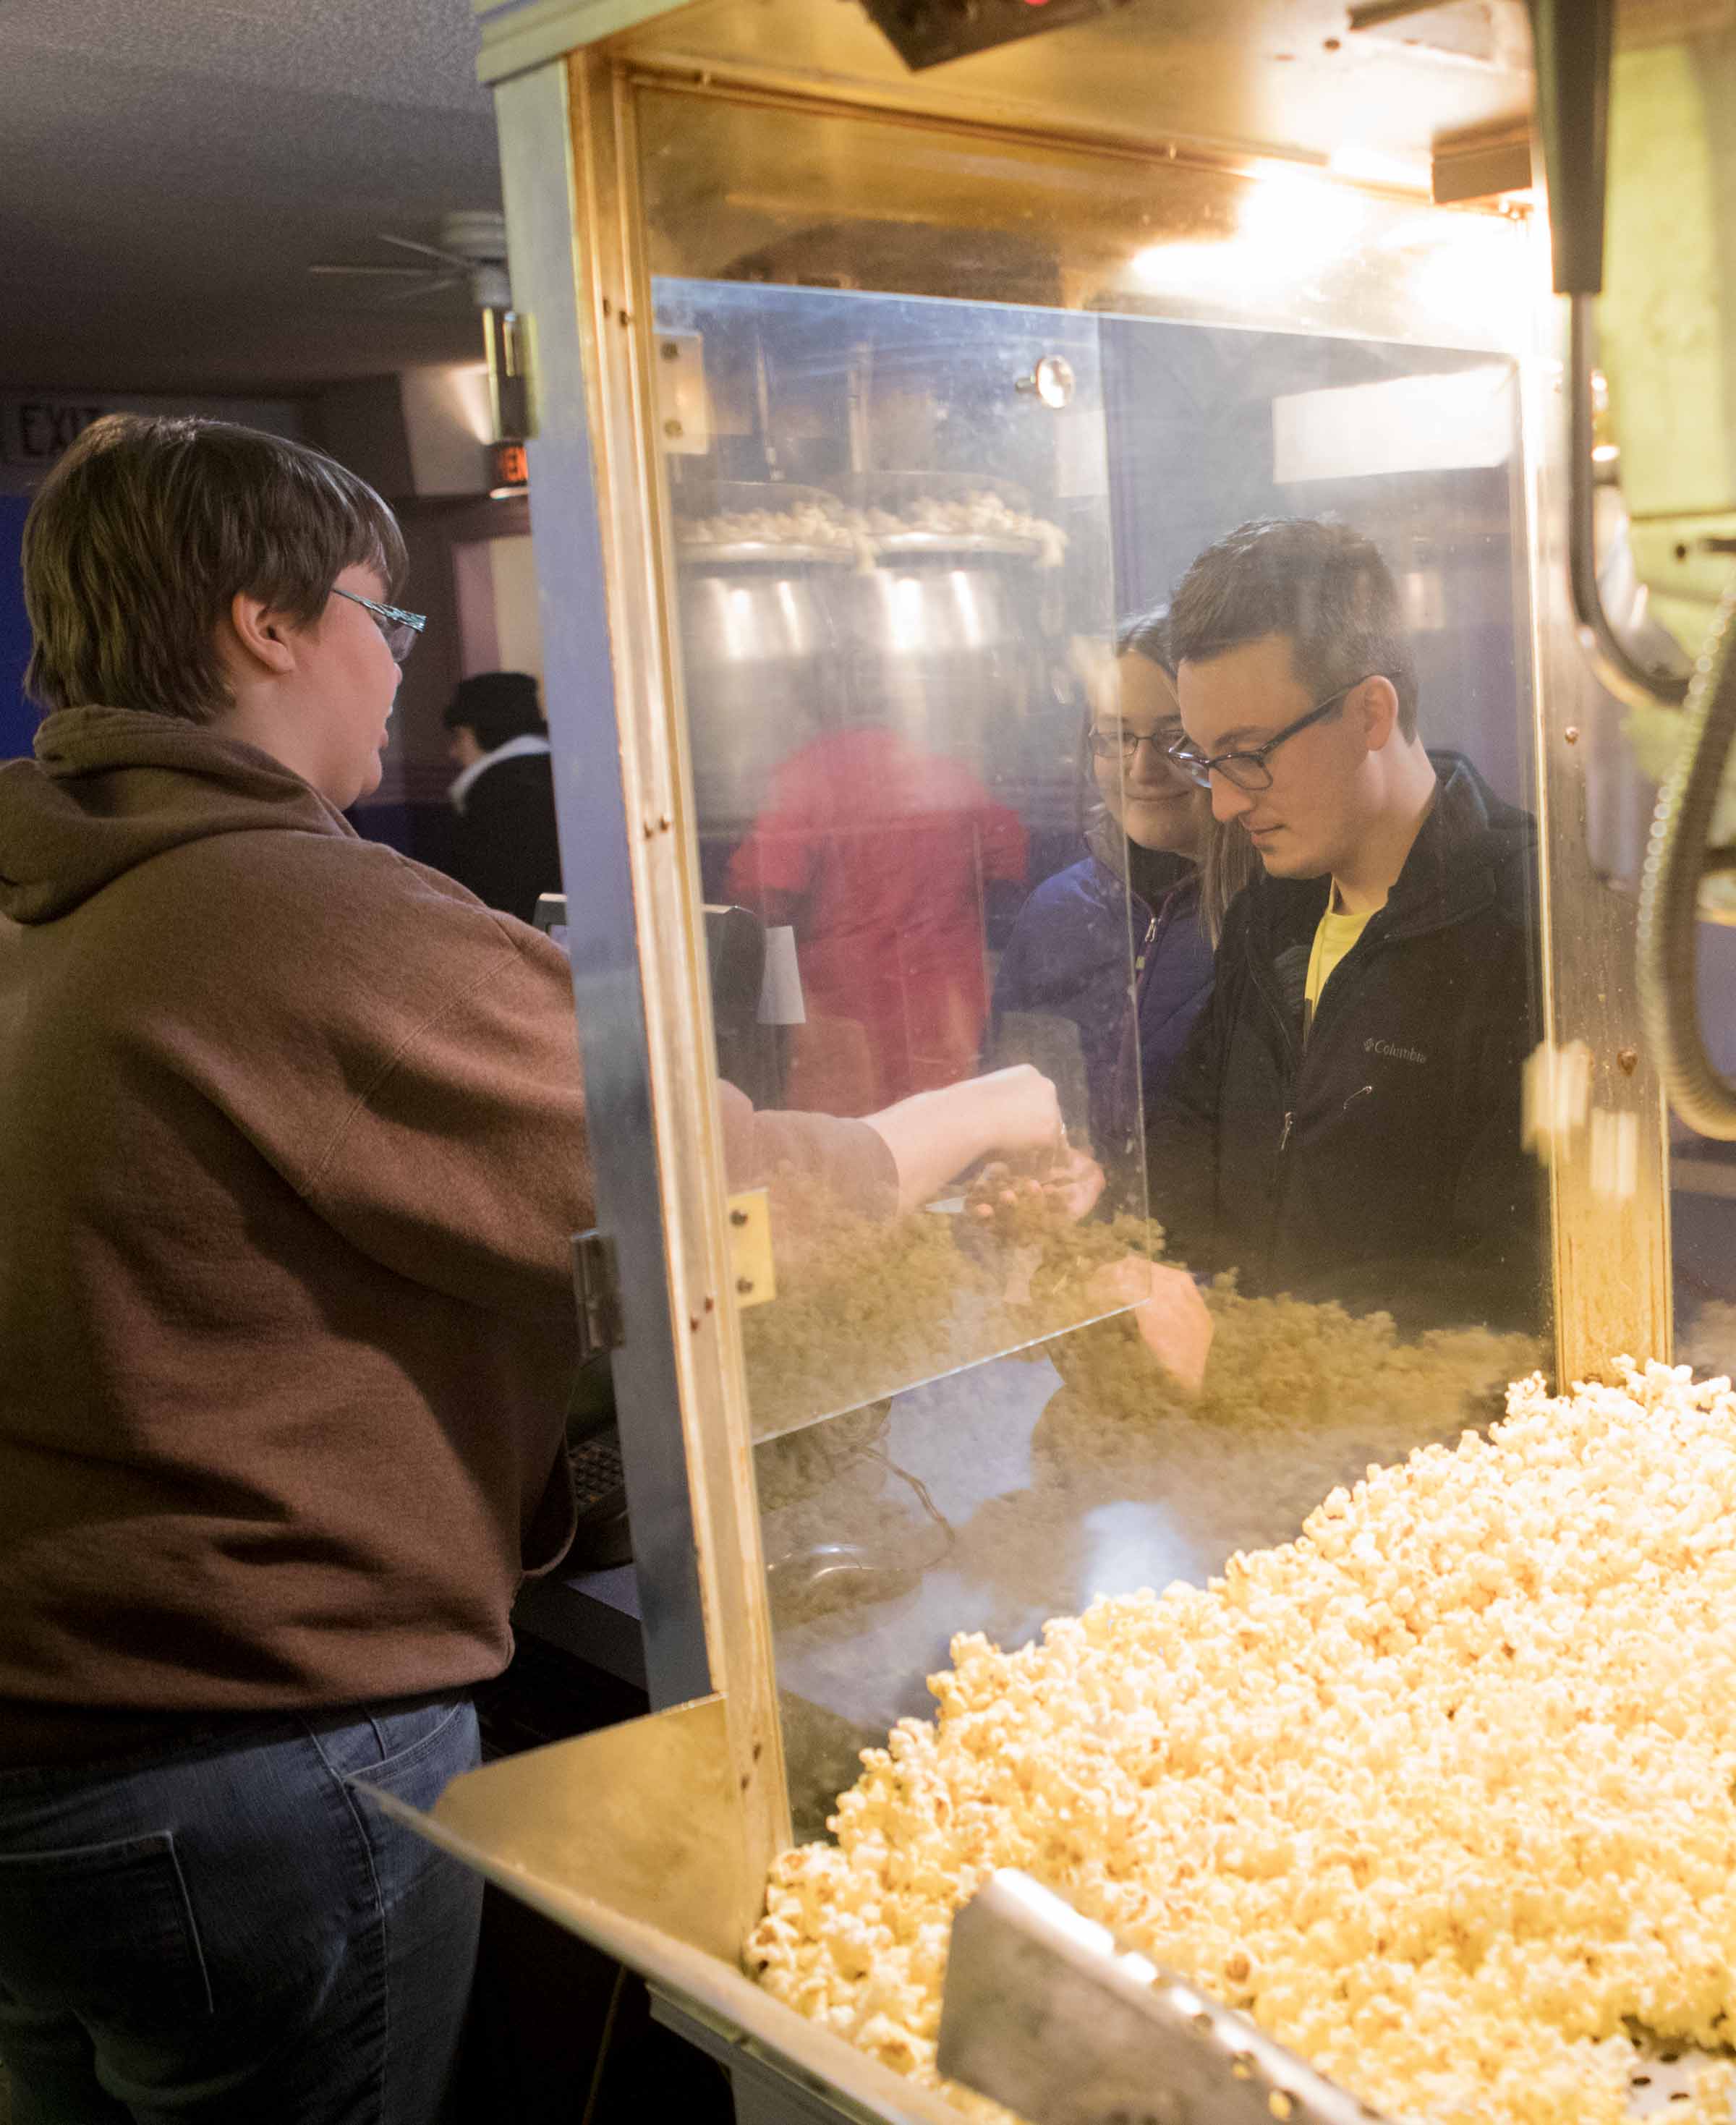 Fifth-year pharmacy student Caitlin Nahirniak and Andy Kremyar, a 2015 «Ӱҵ graduate, buy concessions before the start of a free screening of the movie “Friday Night Lights” at Ada Theatre.